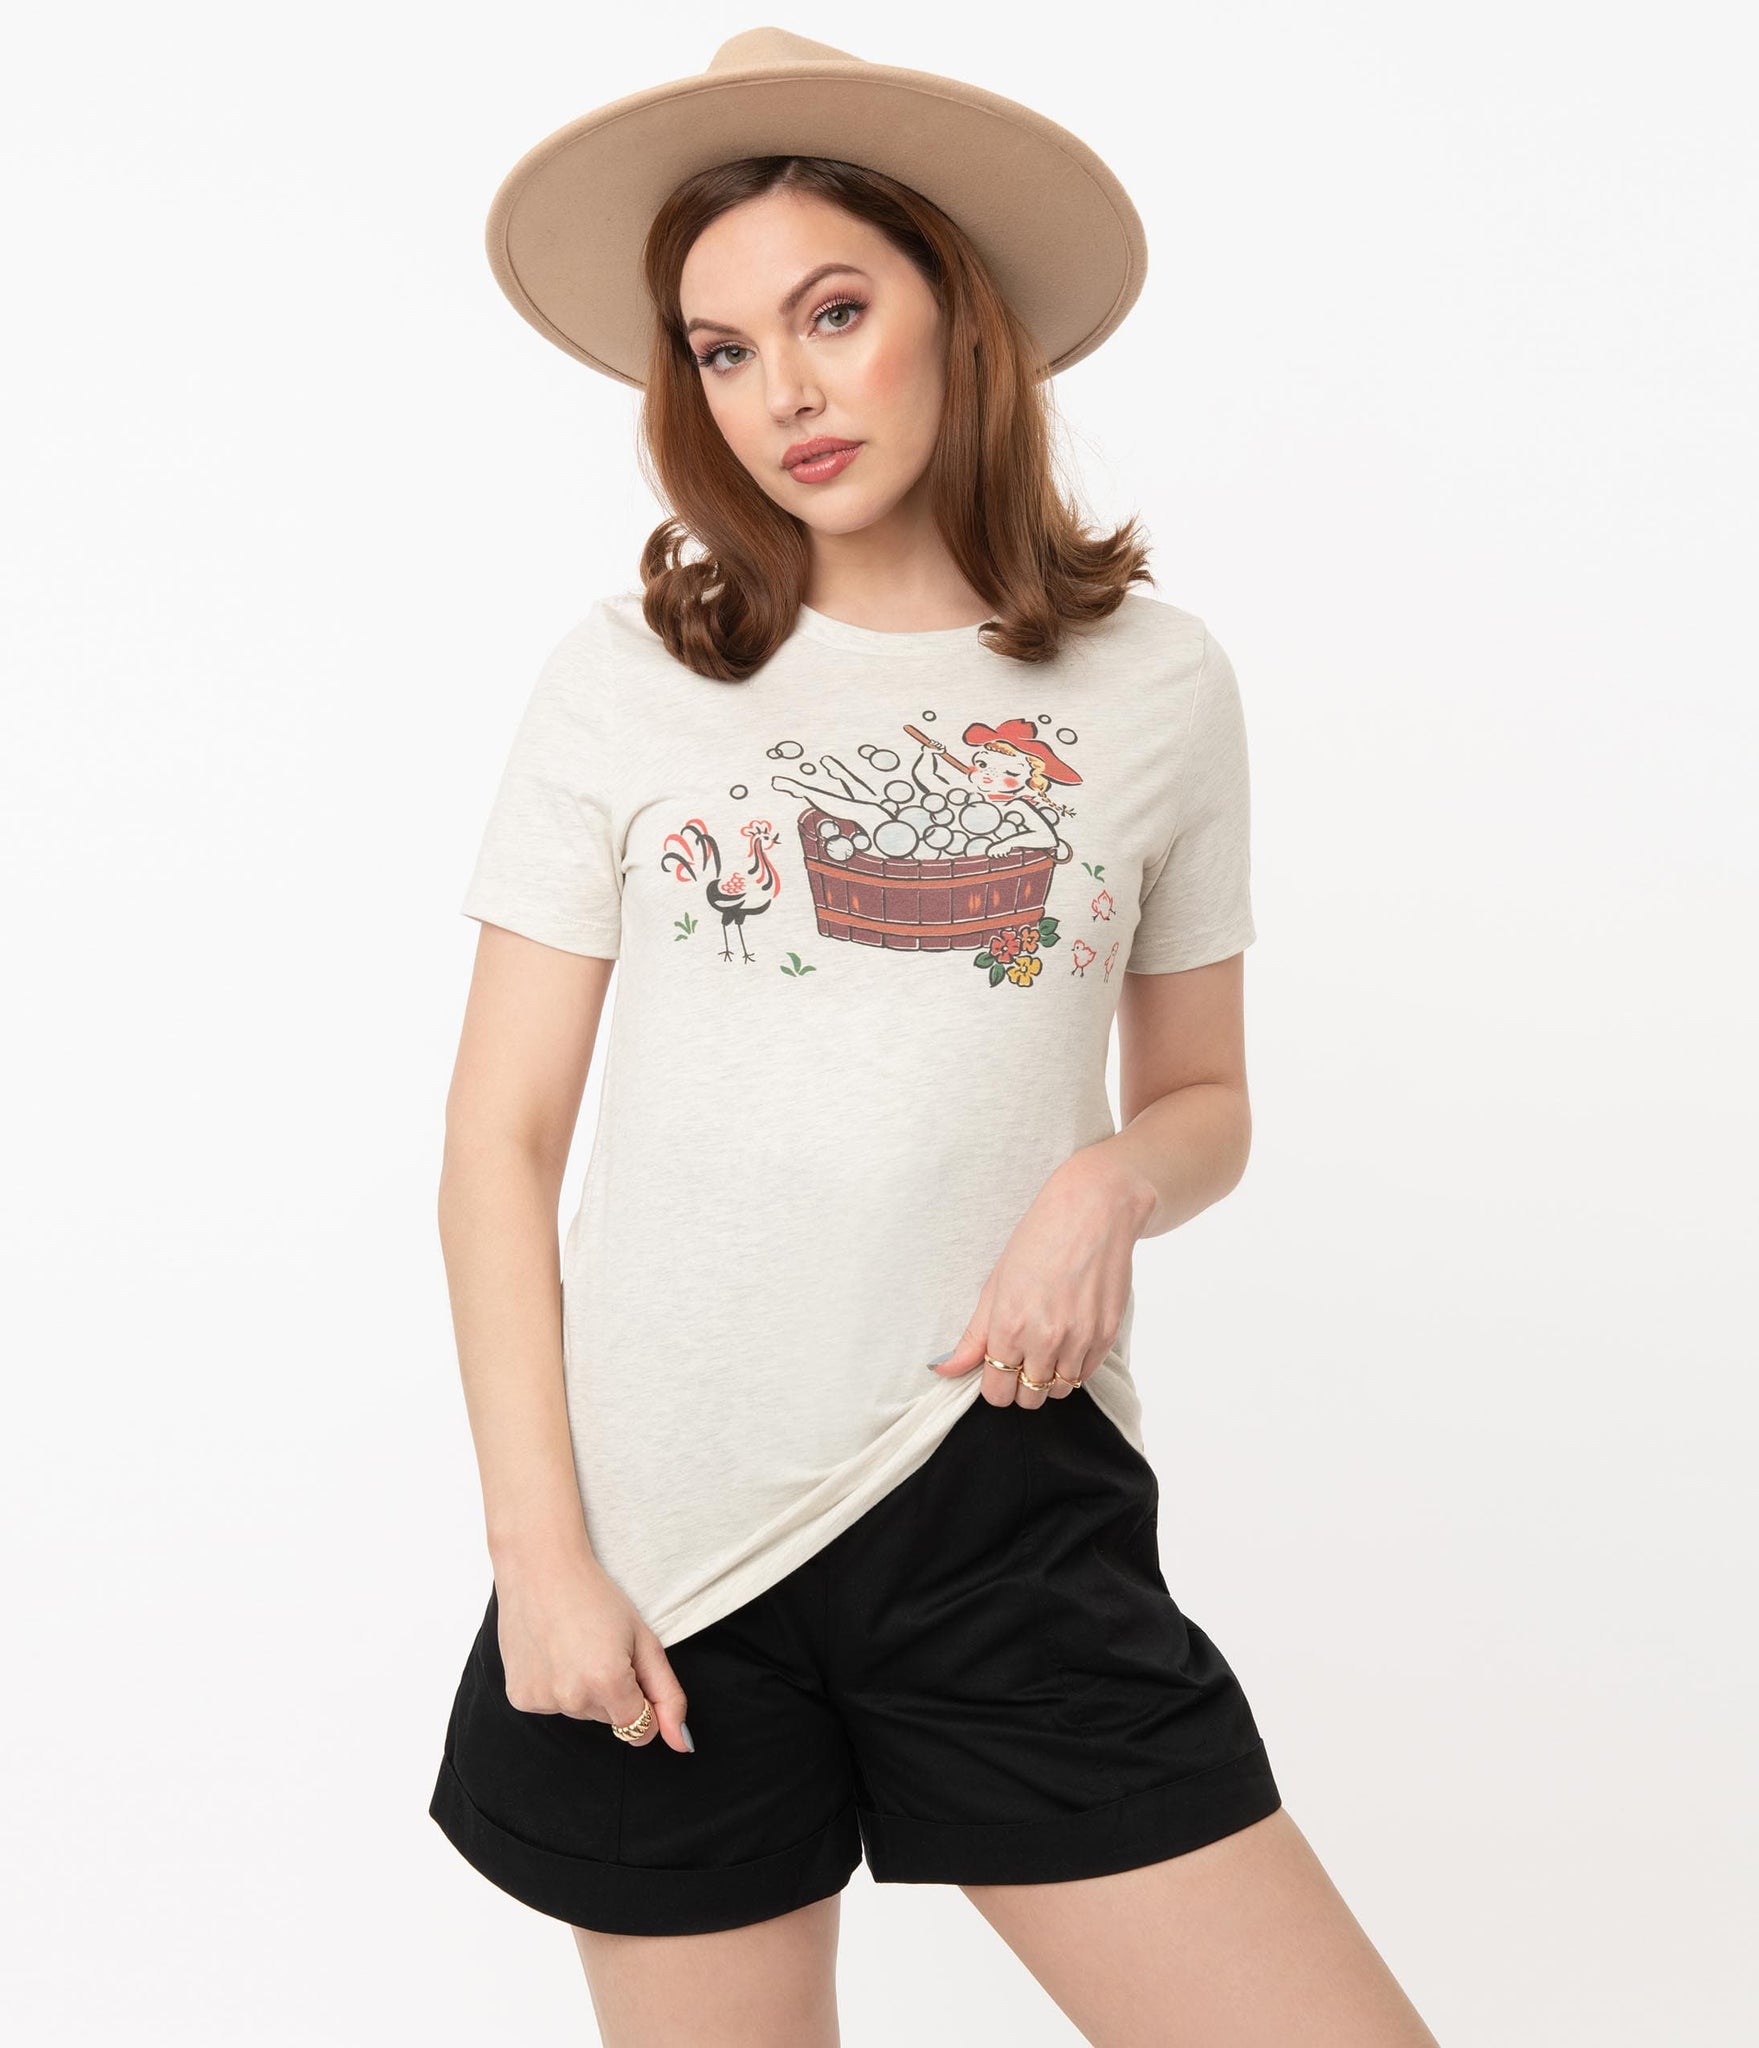 Cowgirl Bubble Bath Pin-Up Fitted Tee Shirt